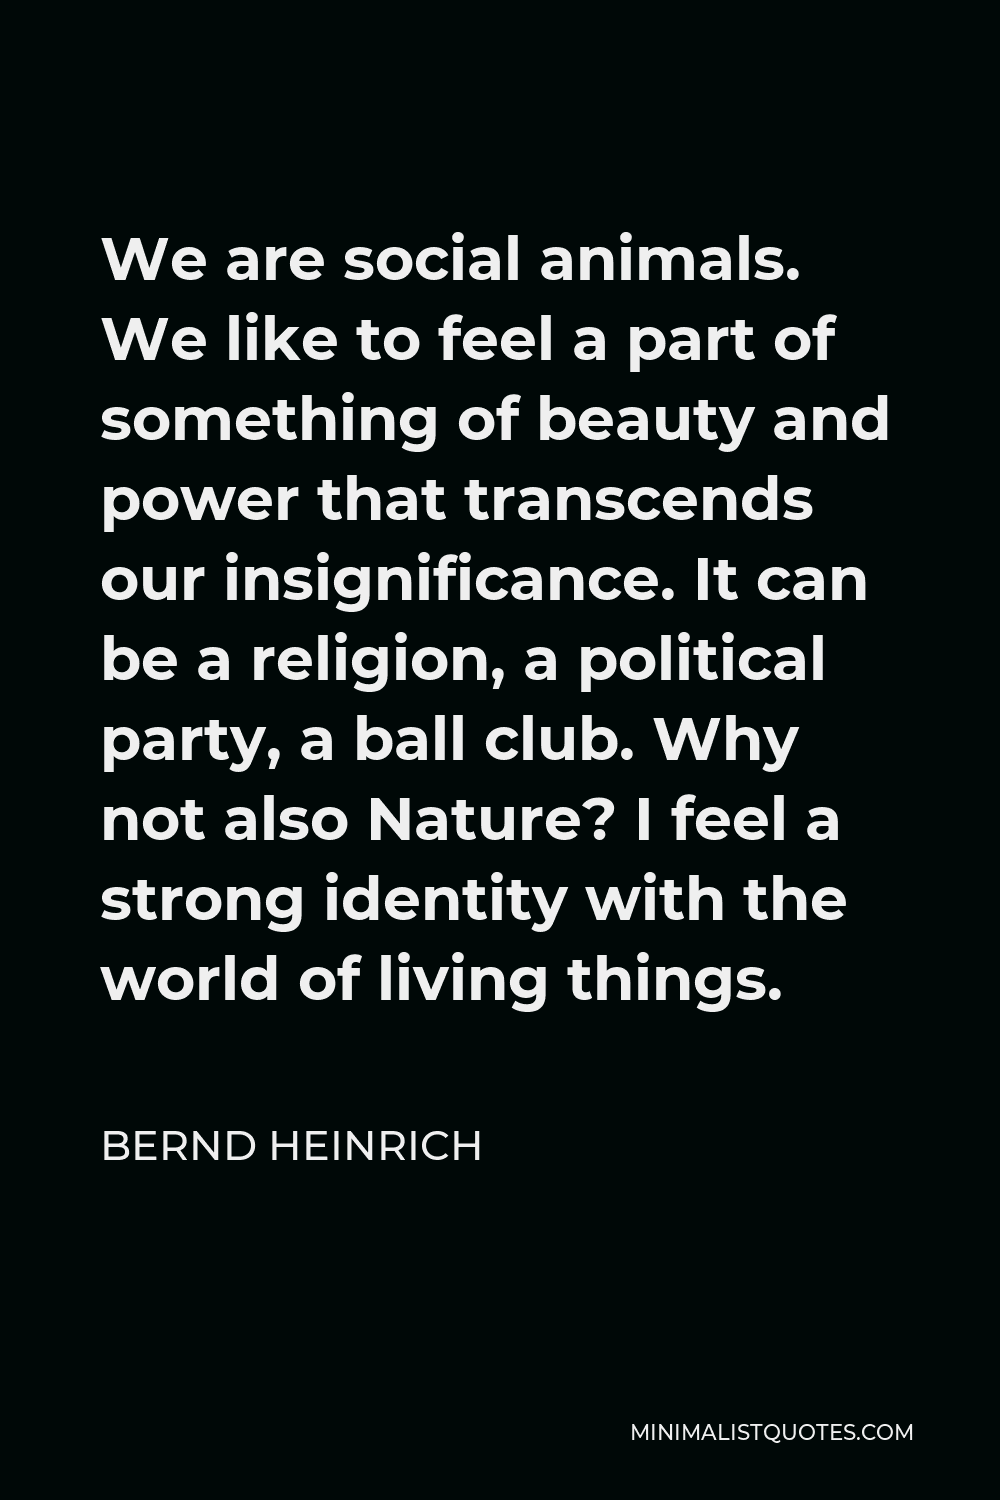 Bernd Heinrich Quote - We are social animals. We like to feel a part of something of beauty and power that transcends our insignificance. It can be a religion, a political party, a ball club. Why not also Nature? I feel a strong identity with the world of living things.